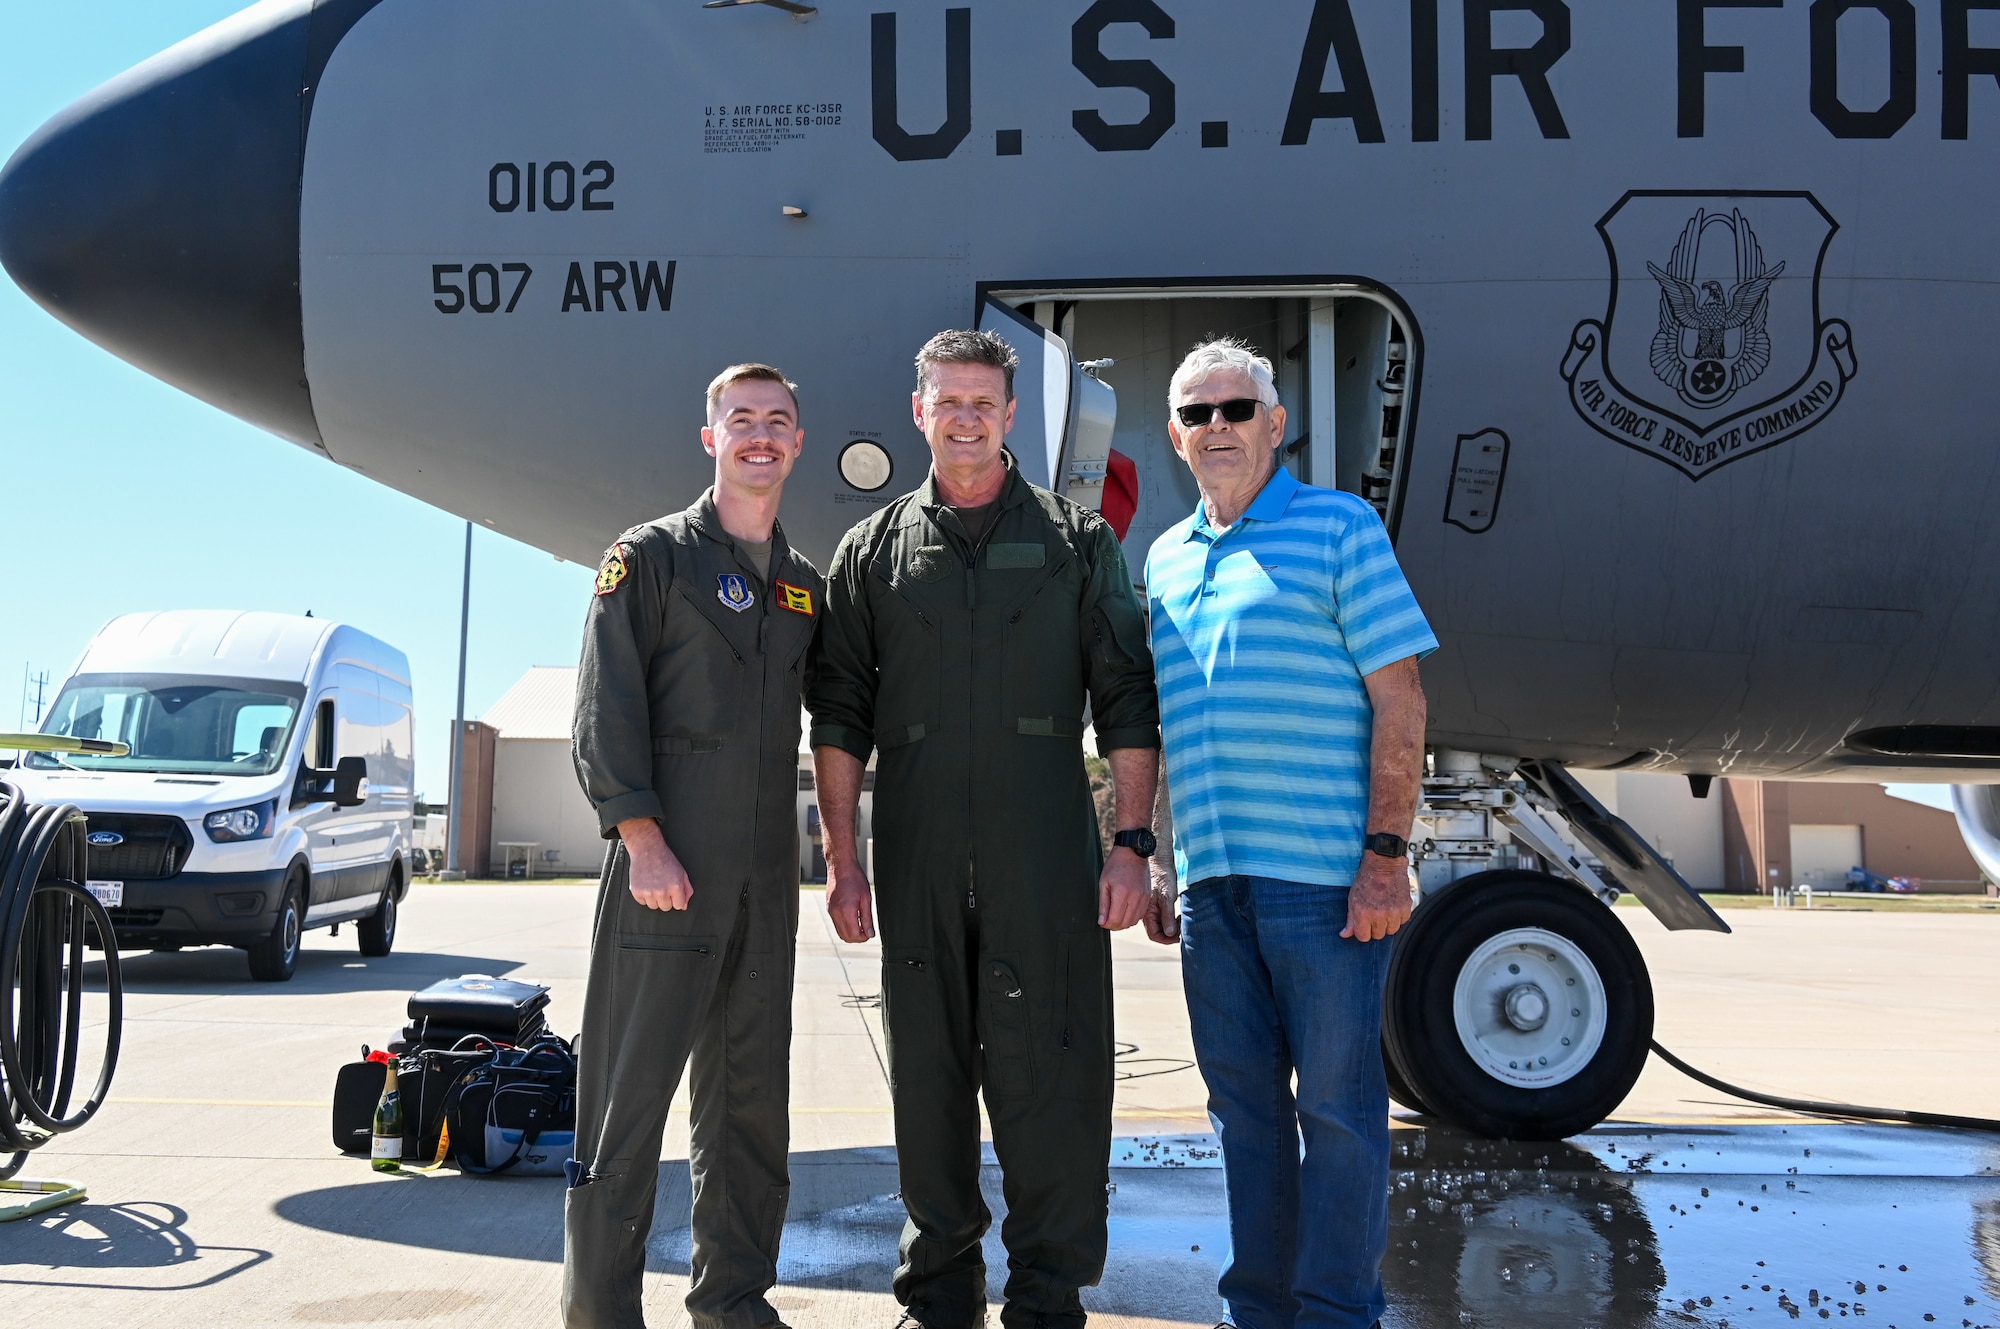 Col. Ken Humphrey, 507th Operations group commander, is joined by his son, 2nd Lt. Kennedy Humphrey, 71st Student Squadron student pilot, and his father, Retired Senior Master Sgt. Steve Humphrey, during his final flight as an 507th Air Refueling Wing Okie Sept. 29, 2022, Tinker Air Force Base, Oklahoma. 2nd Lt. Kennedy Humphrey will become a KC-135 pilot with the Okies at the conclusion of his pilot training. Kennedy will be the third generation in his family become an Okie. (U.S. Air Force photo by 2nd Lt. Mary Begy)